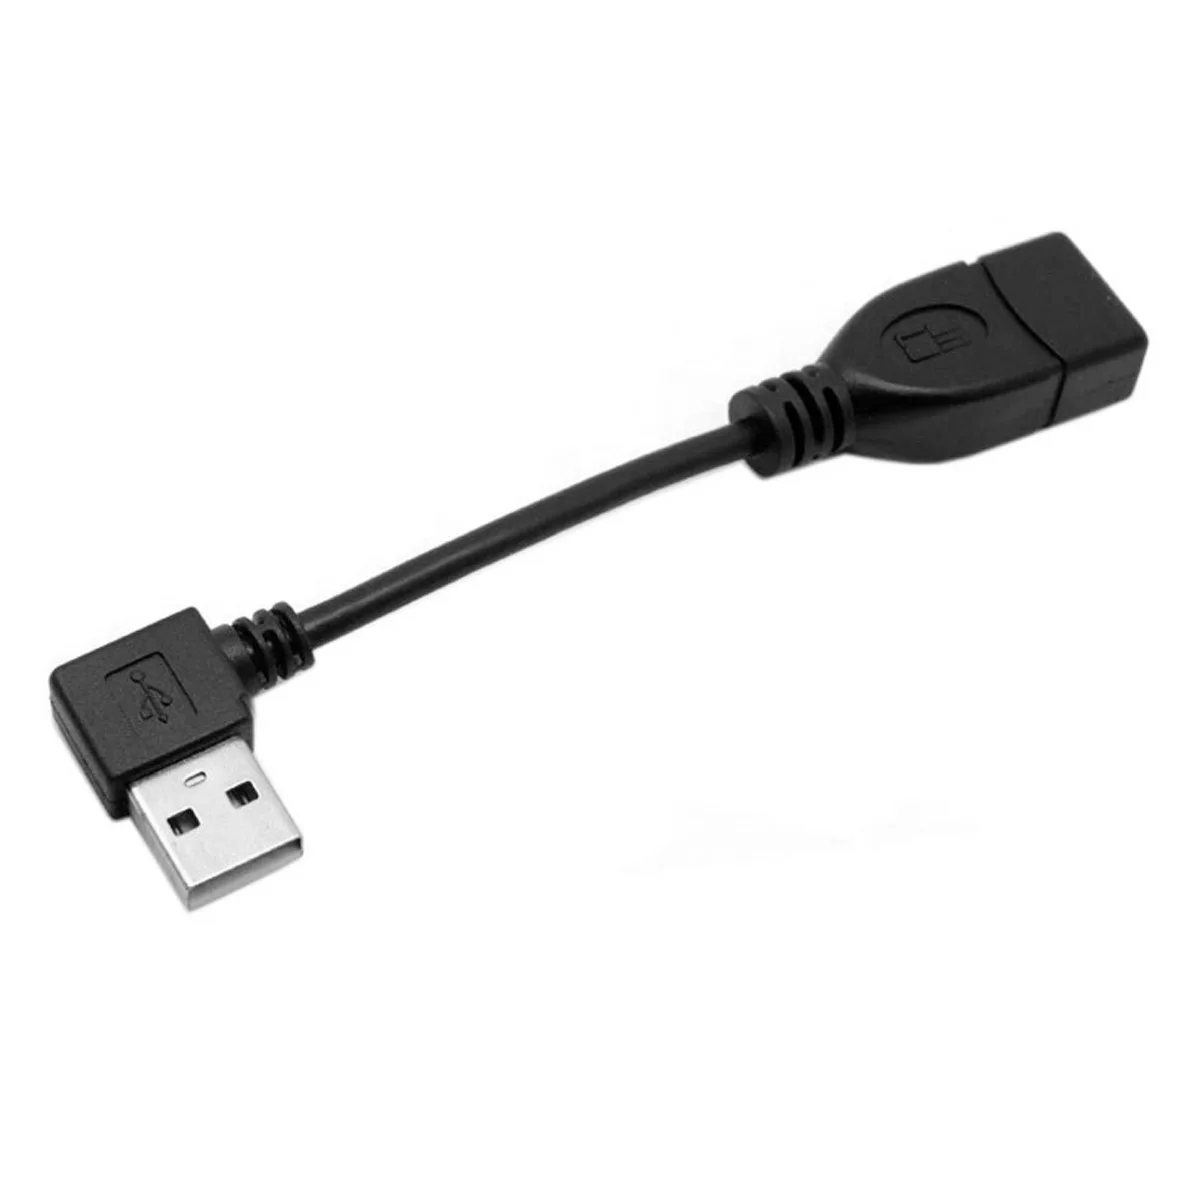 

10cm 20cm 40cm USB 2.0 A Type 90 Degree Left Angled 480M Male to Female Extension Cable Black